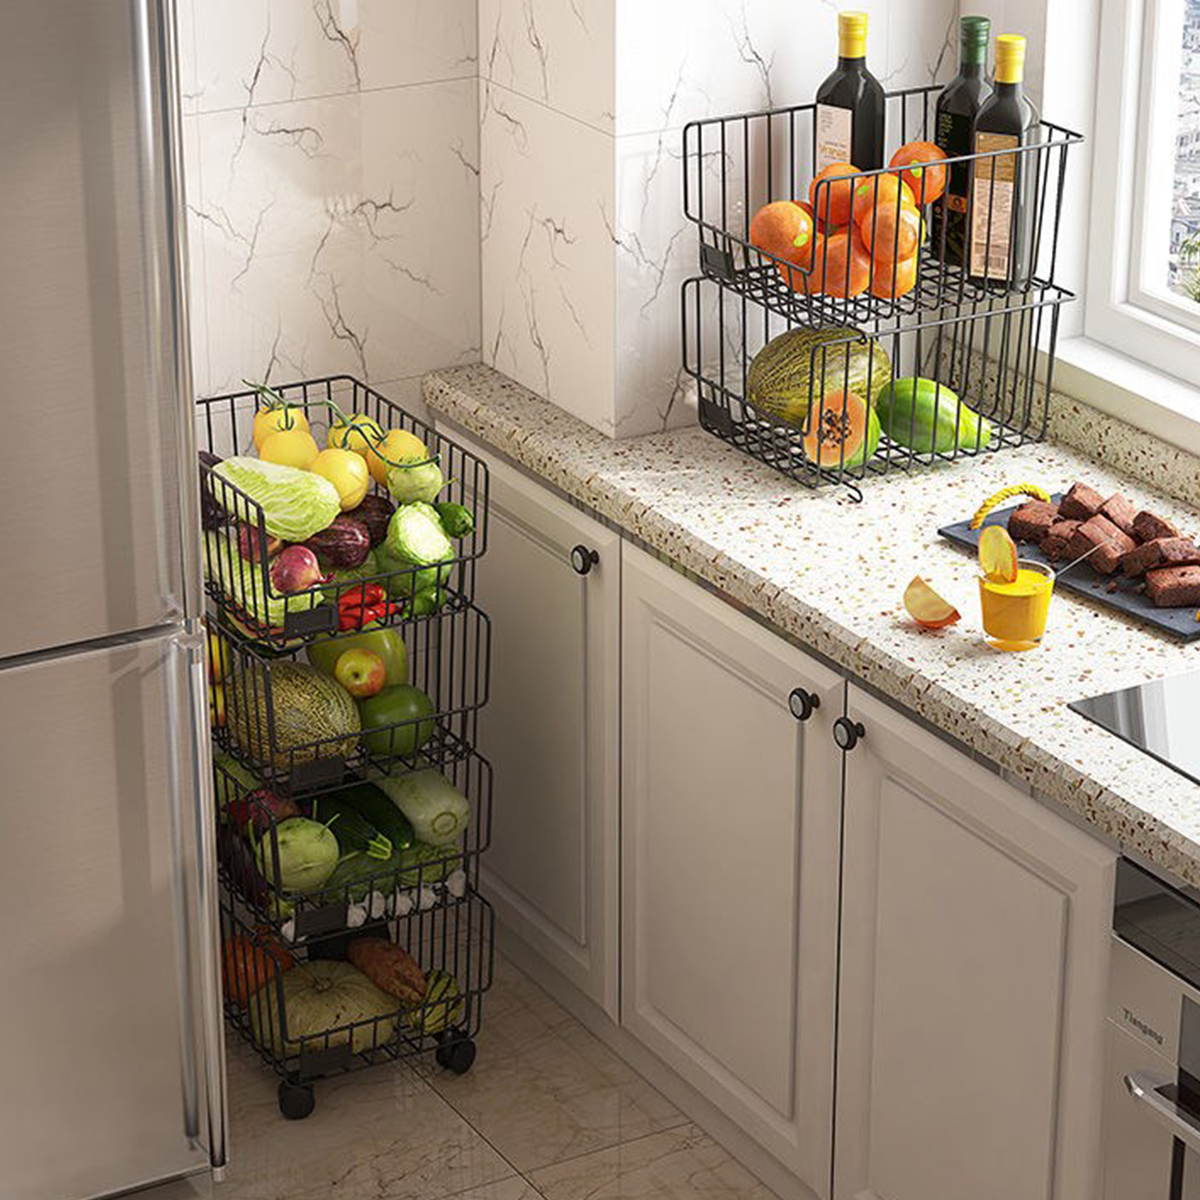 Find Kitchen Crevice Shelf Floor Multi Layer Vegetable Shelf Household Storage Rack Vegetable Basket Removable Storage Basket for Home Office for Sale on Gipsybee.com with cryptocurrencies